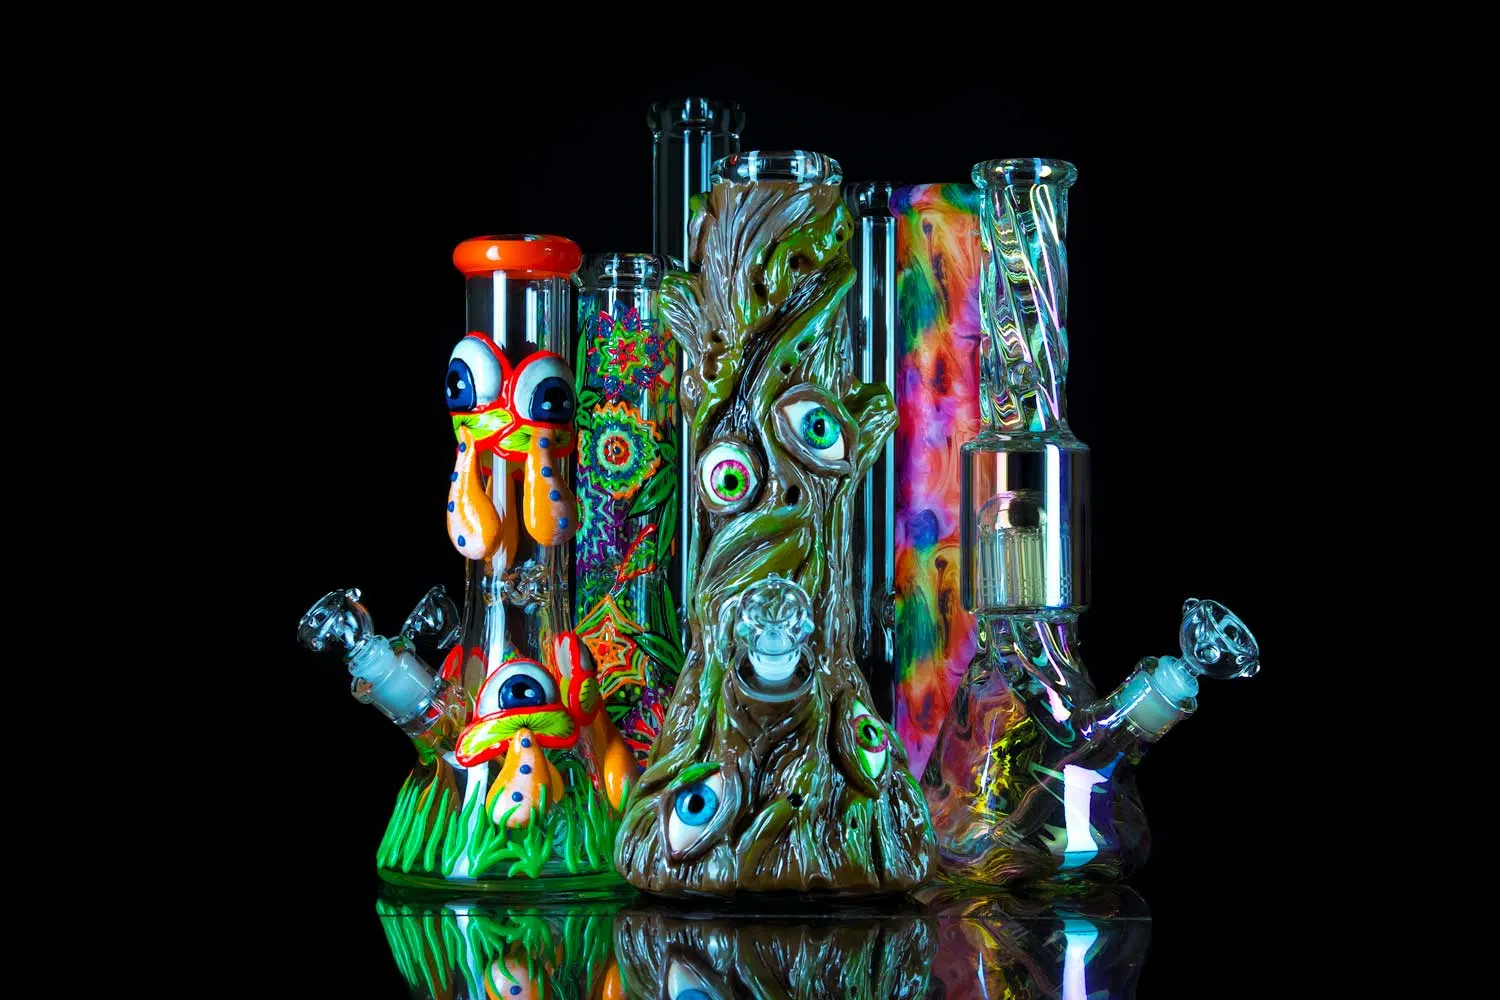 Big bongs for sale on black table